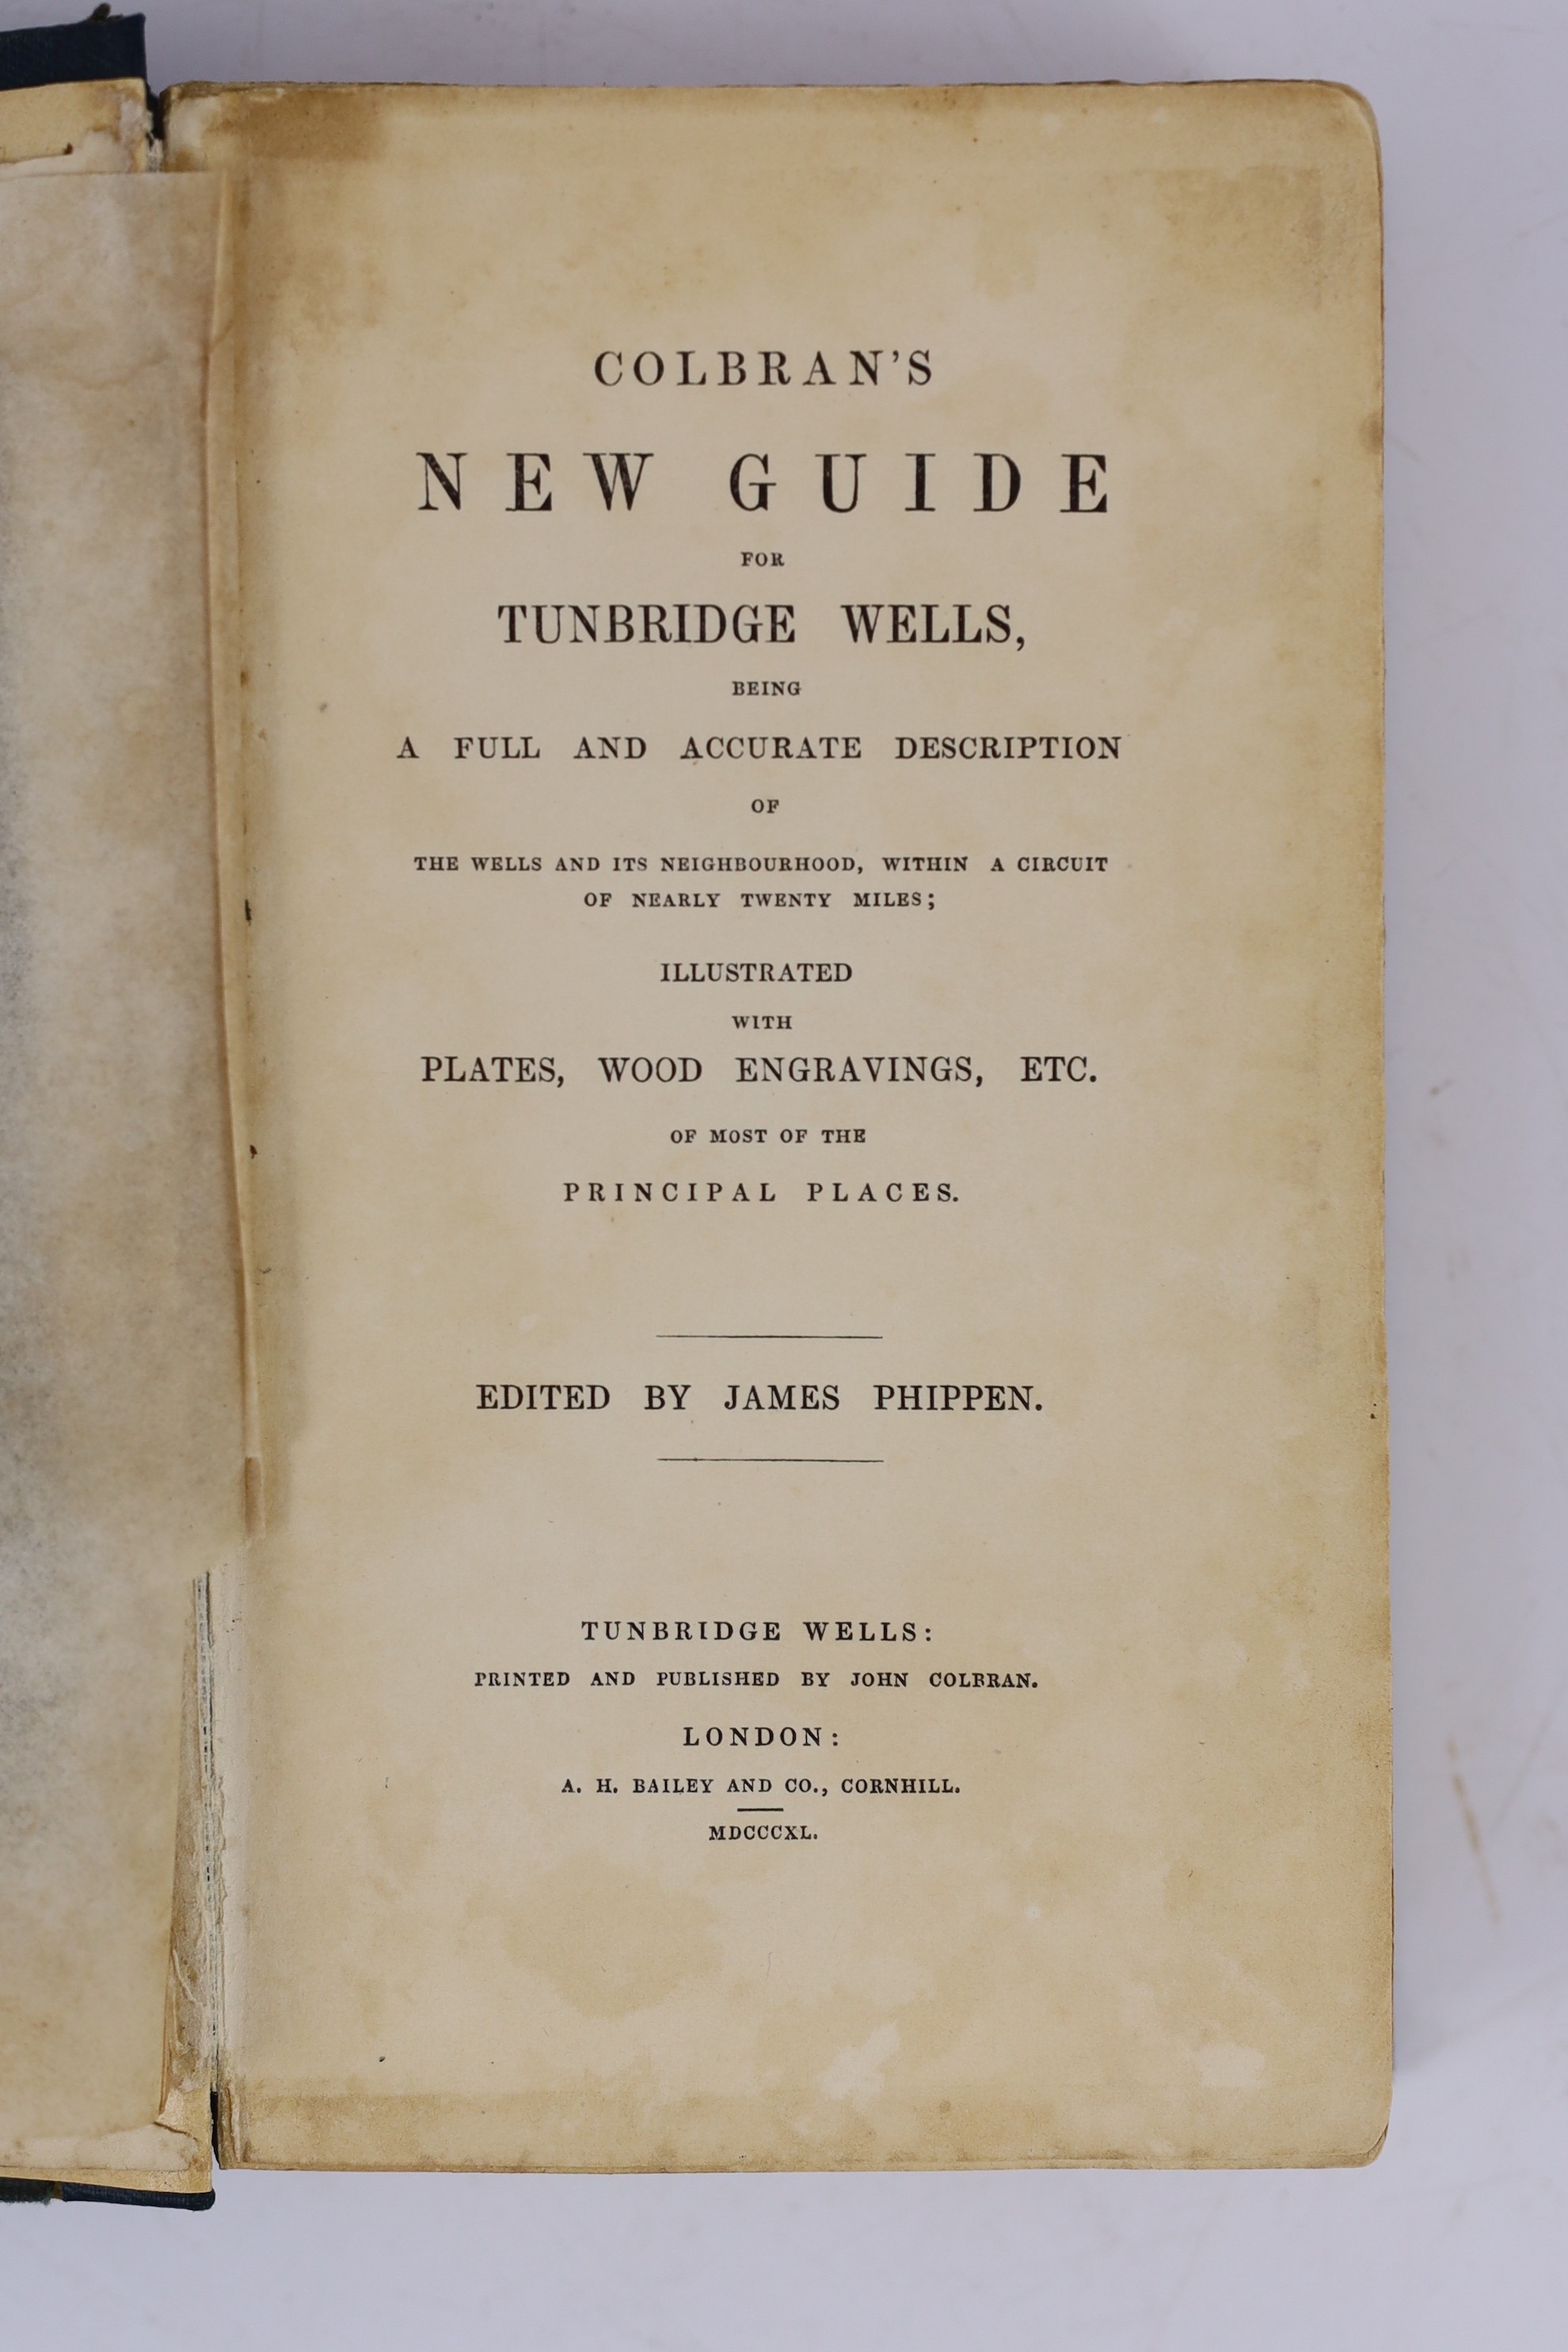 KENT, TUNBRIDGE WELLS: Colbran's New Guide for Tunbridge Wells.... Edited by James Phippen. hand coloured folded map, 16 plates (3 folded), engraved text illus., subscribers list and 32pp. advertiser; original gilt and b